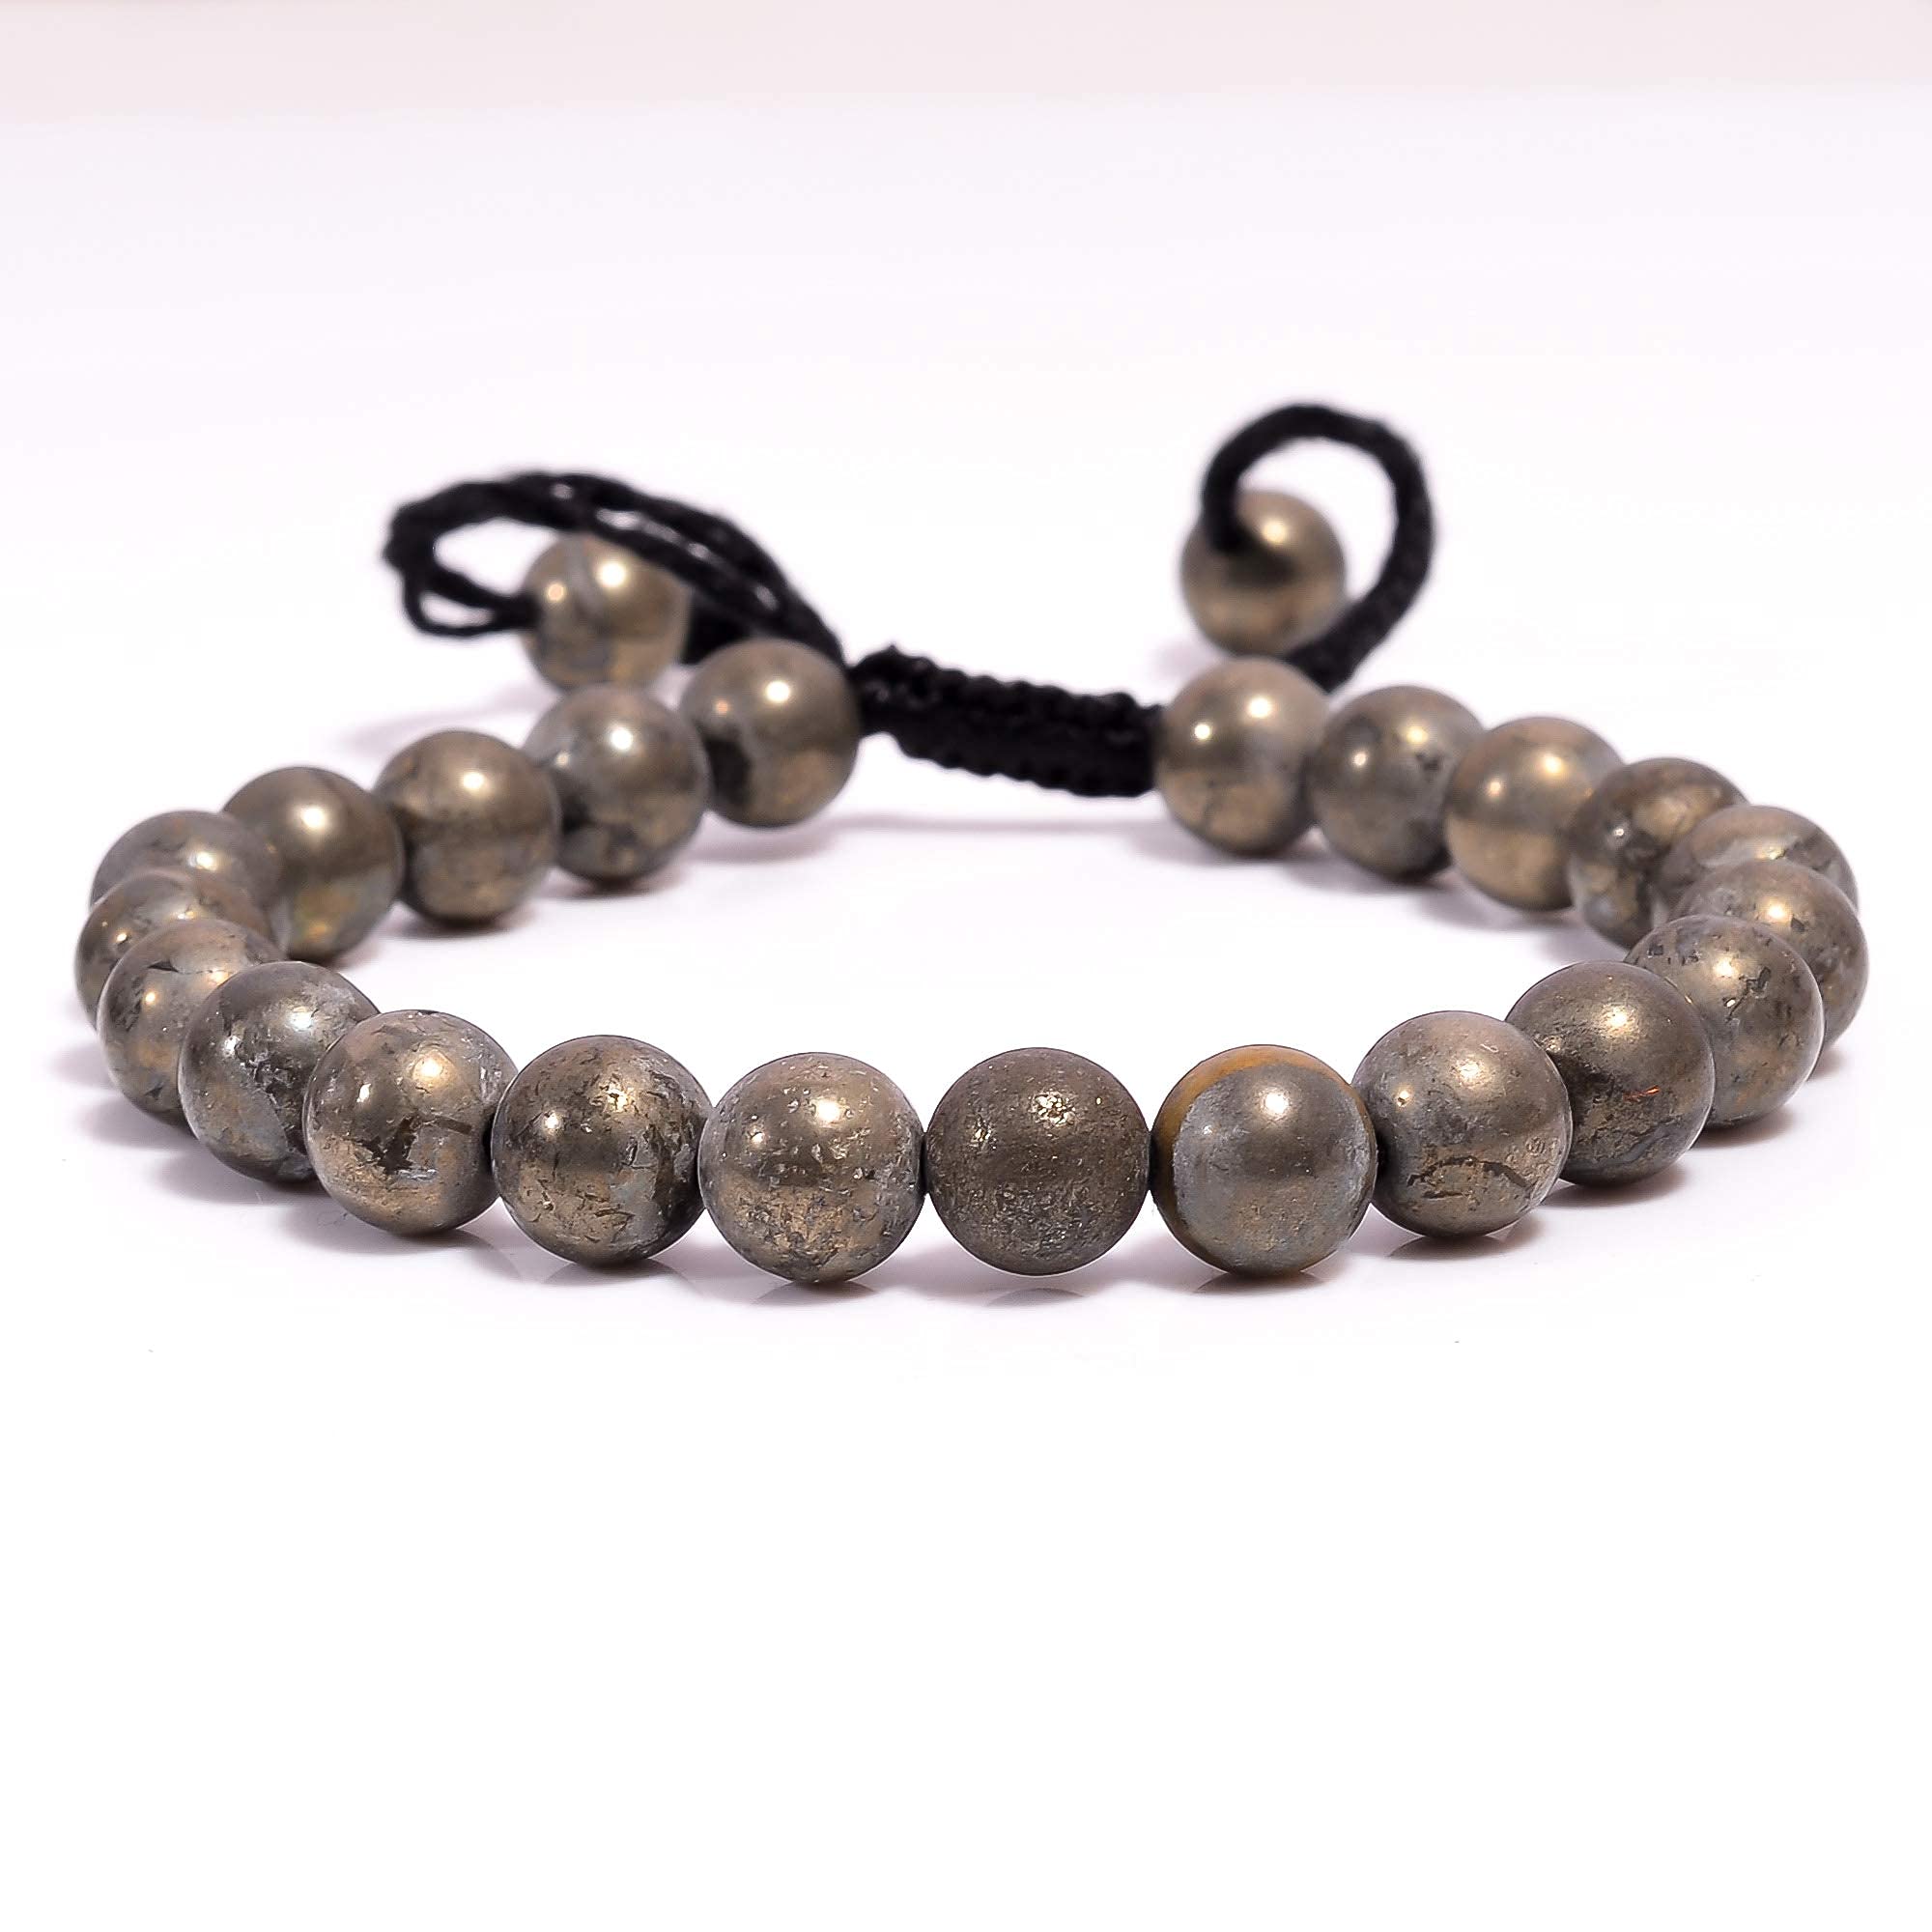 BEADS HUB Natural Pyrite Power Bracelet Round Smooth Beads 8 mm Adjustable Bracelet Confidence Protection Concentration Spirituality and Increasing Creativity For Girls,Man,Woman,Friend,Gift,Boys,FriendshipBand